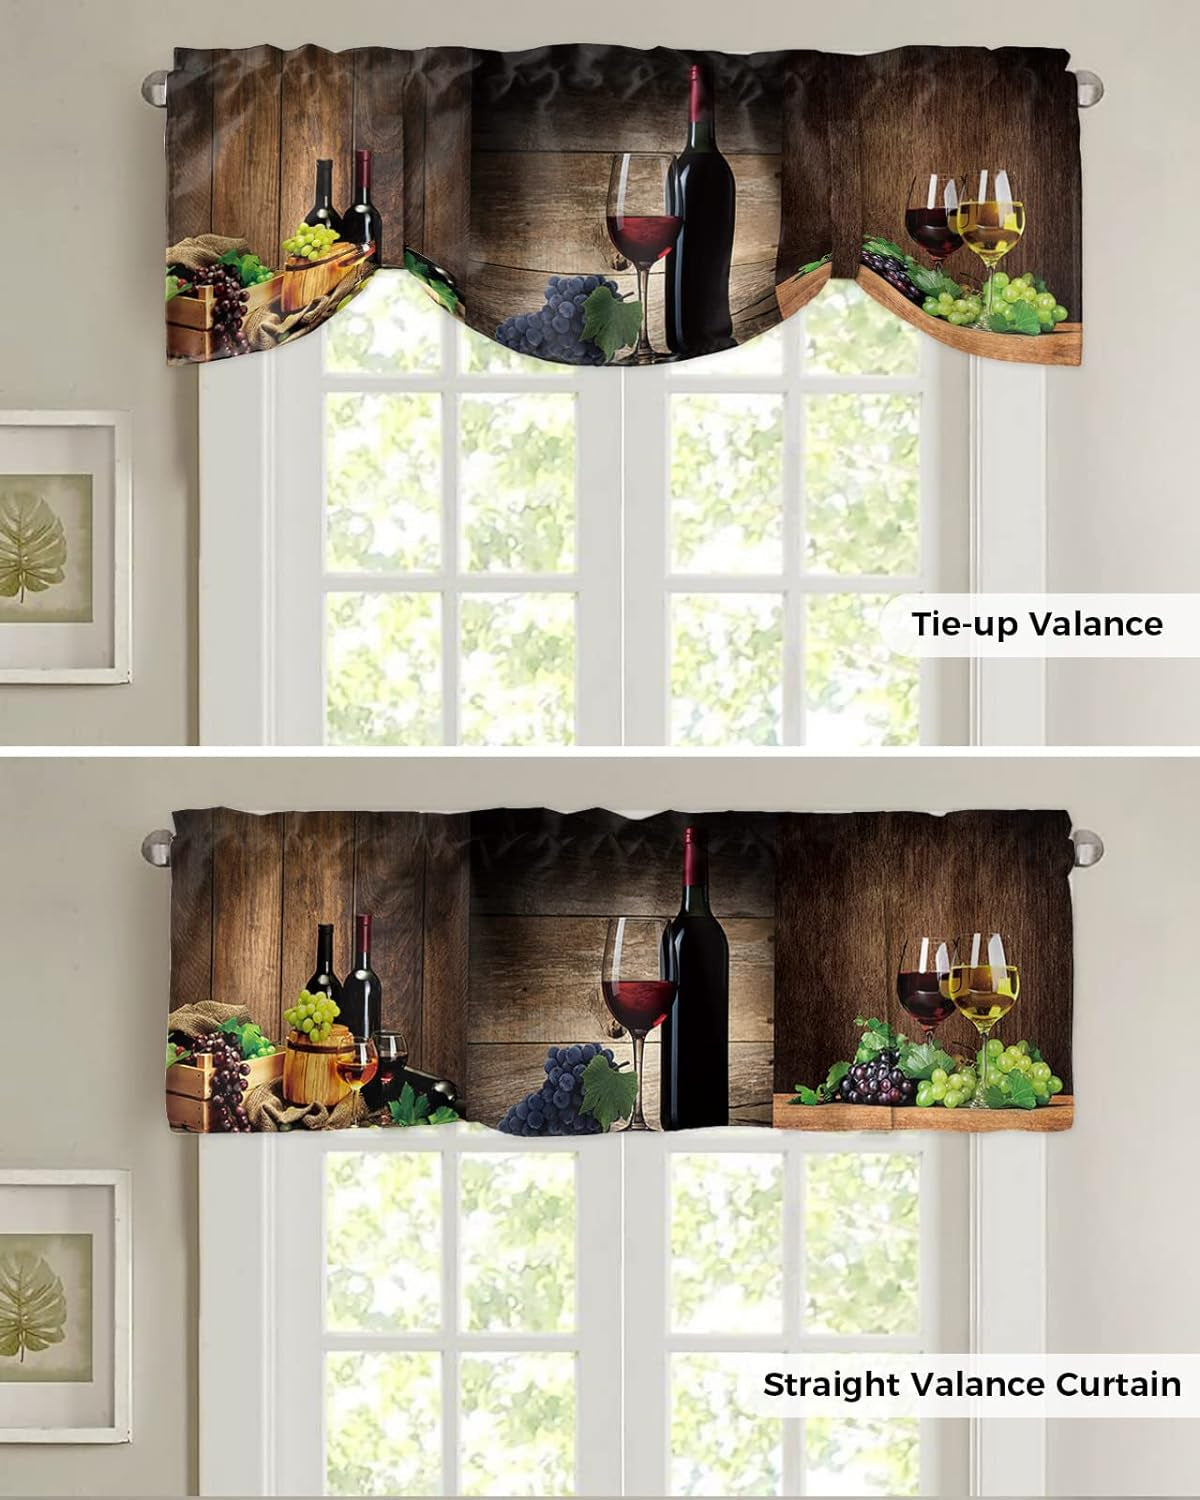 Farm Grape Wine Glass Tie up Curtain Valance for Windows,Wine Barrel Vintage Wooden Board Rod Pocket Valance Short Curtain Adjustable Tie-Up Shade Valances,Window Treatment for Living Room 60X18In